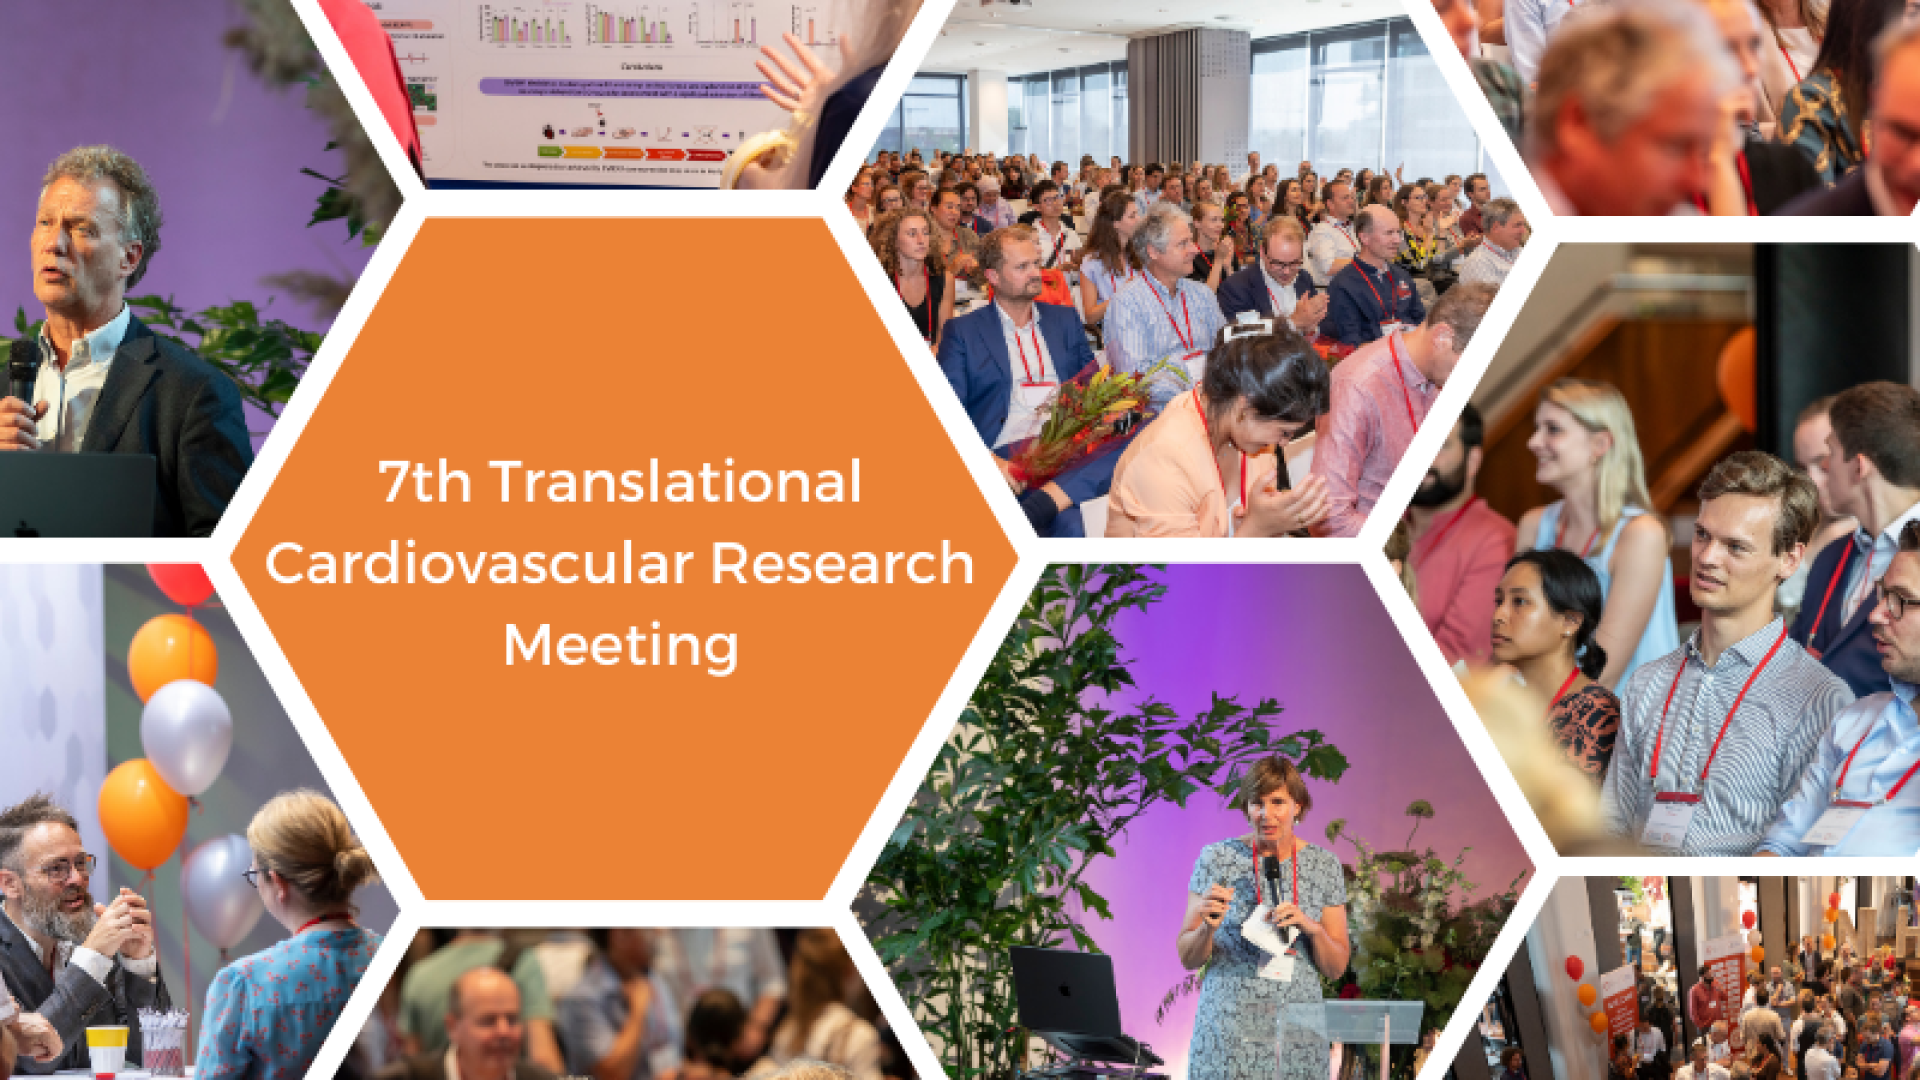 7th Translational Cardiovascular Research Meeting